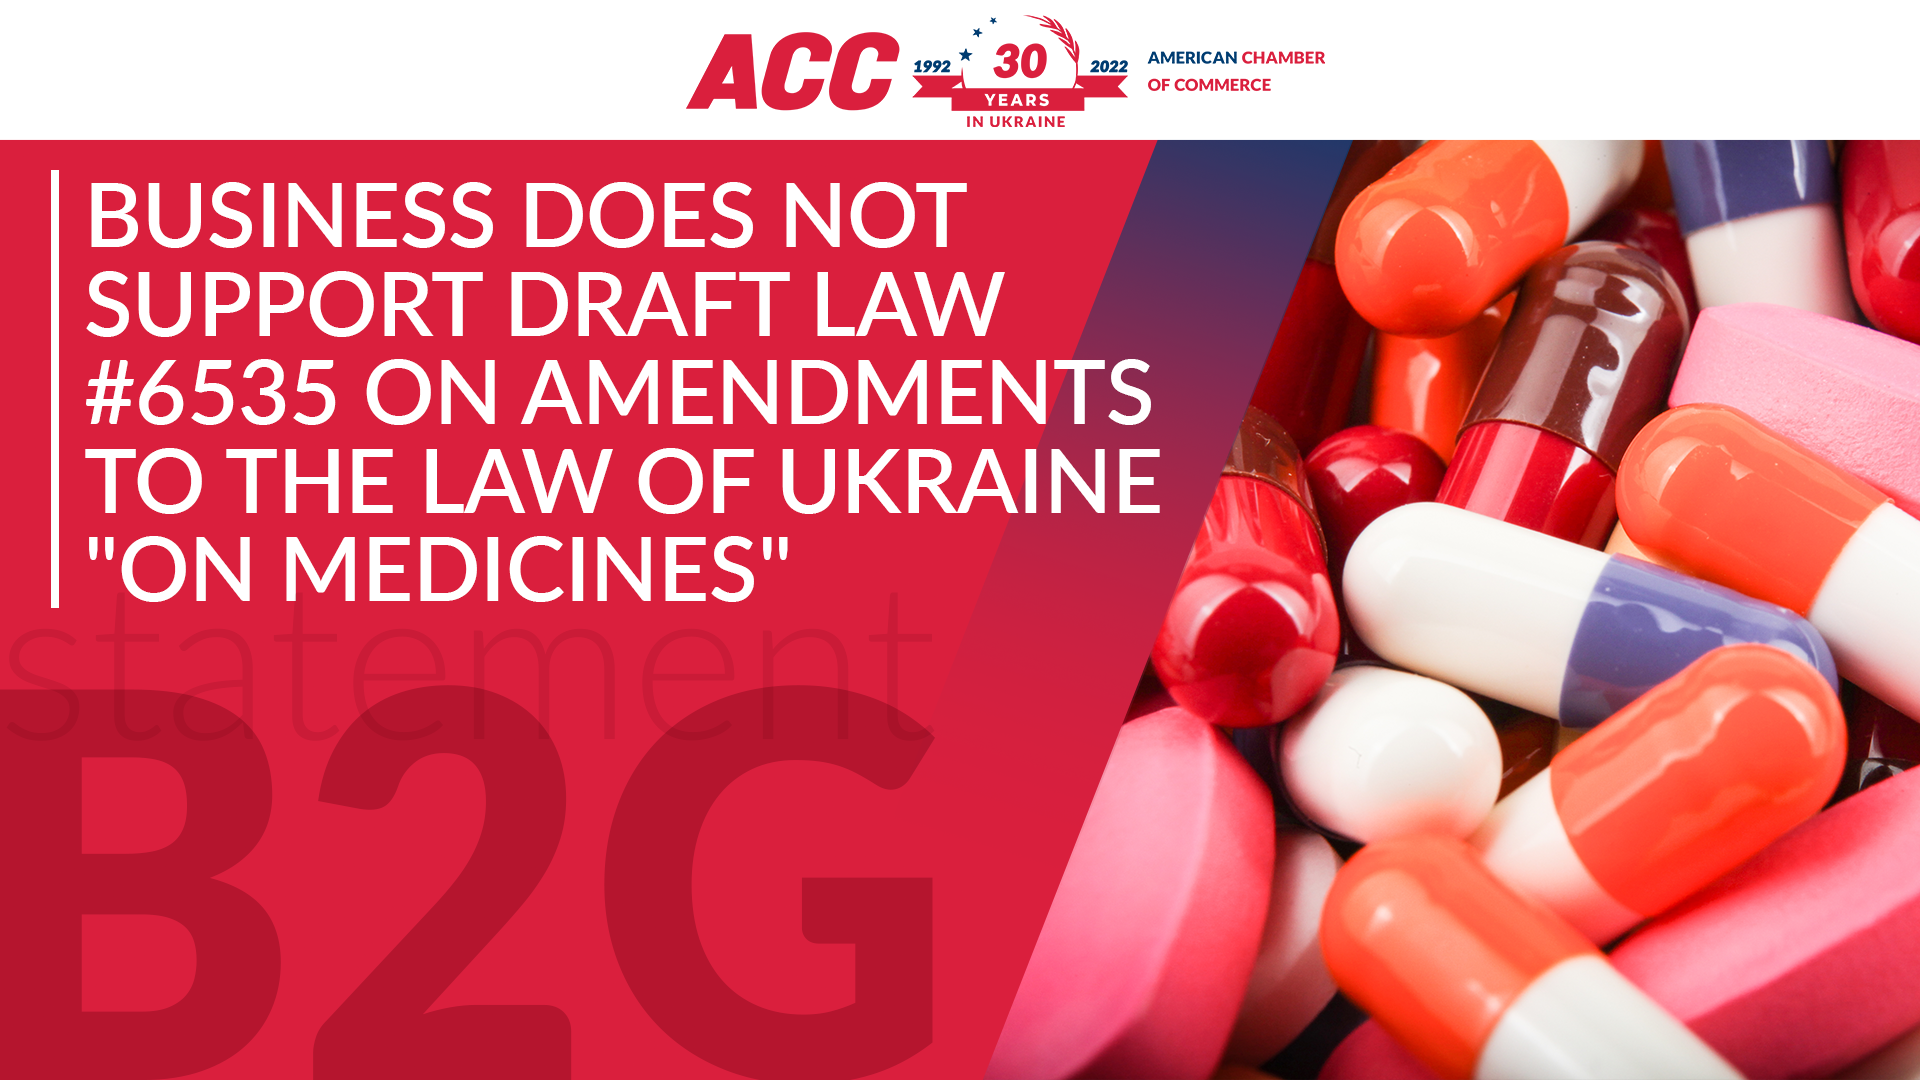 Business Does Not Support Draft Law #6535 on Amendments to the Law of Ukraine “On Medicines”